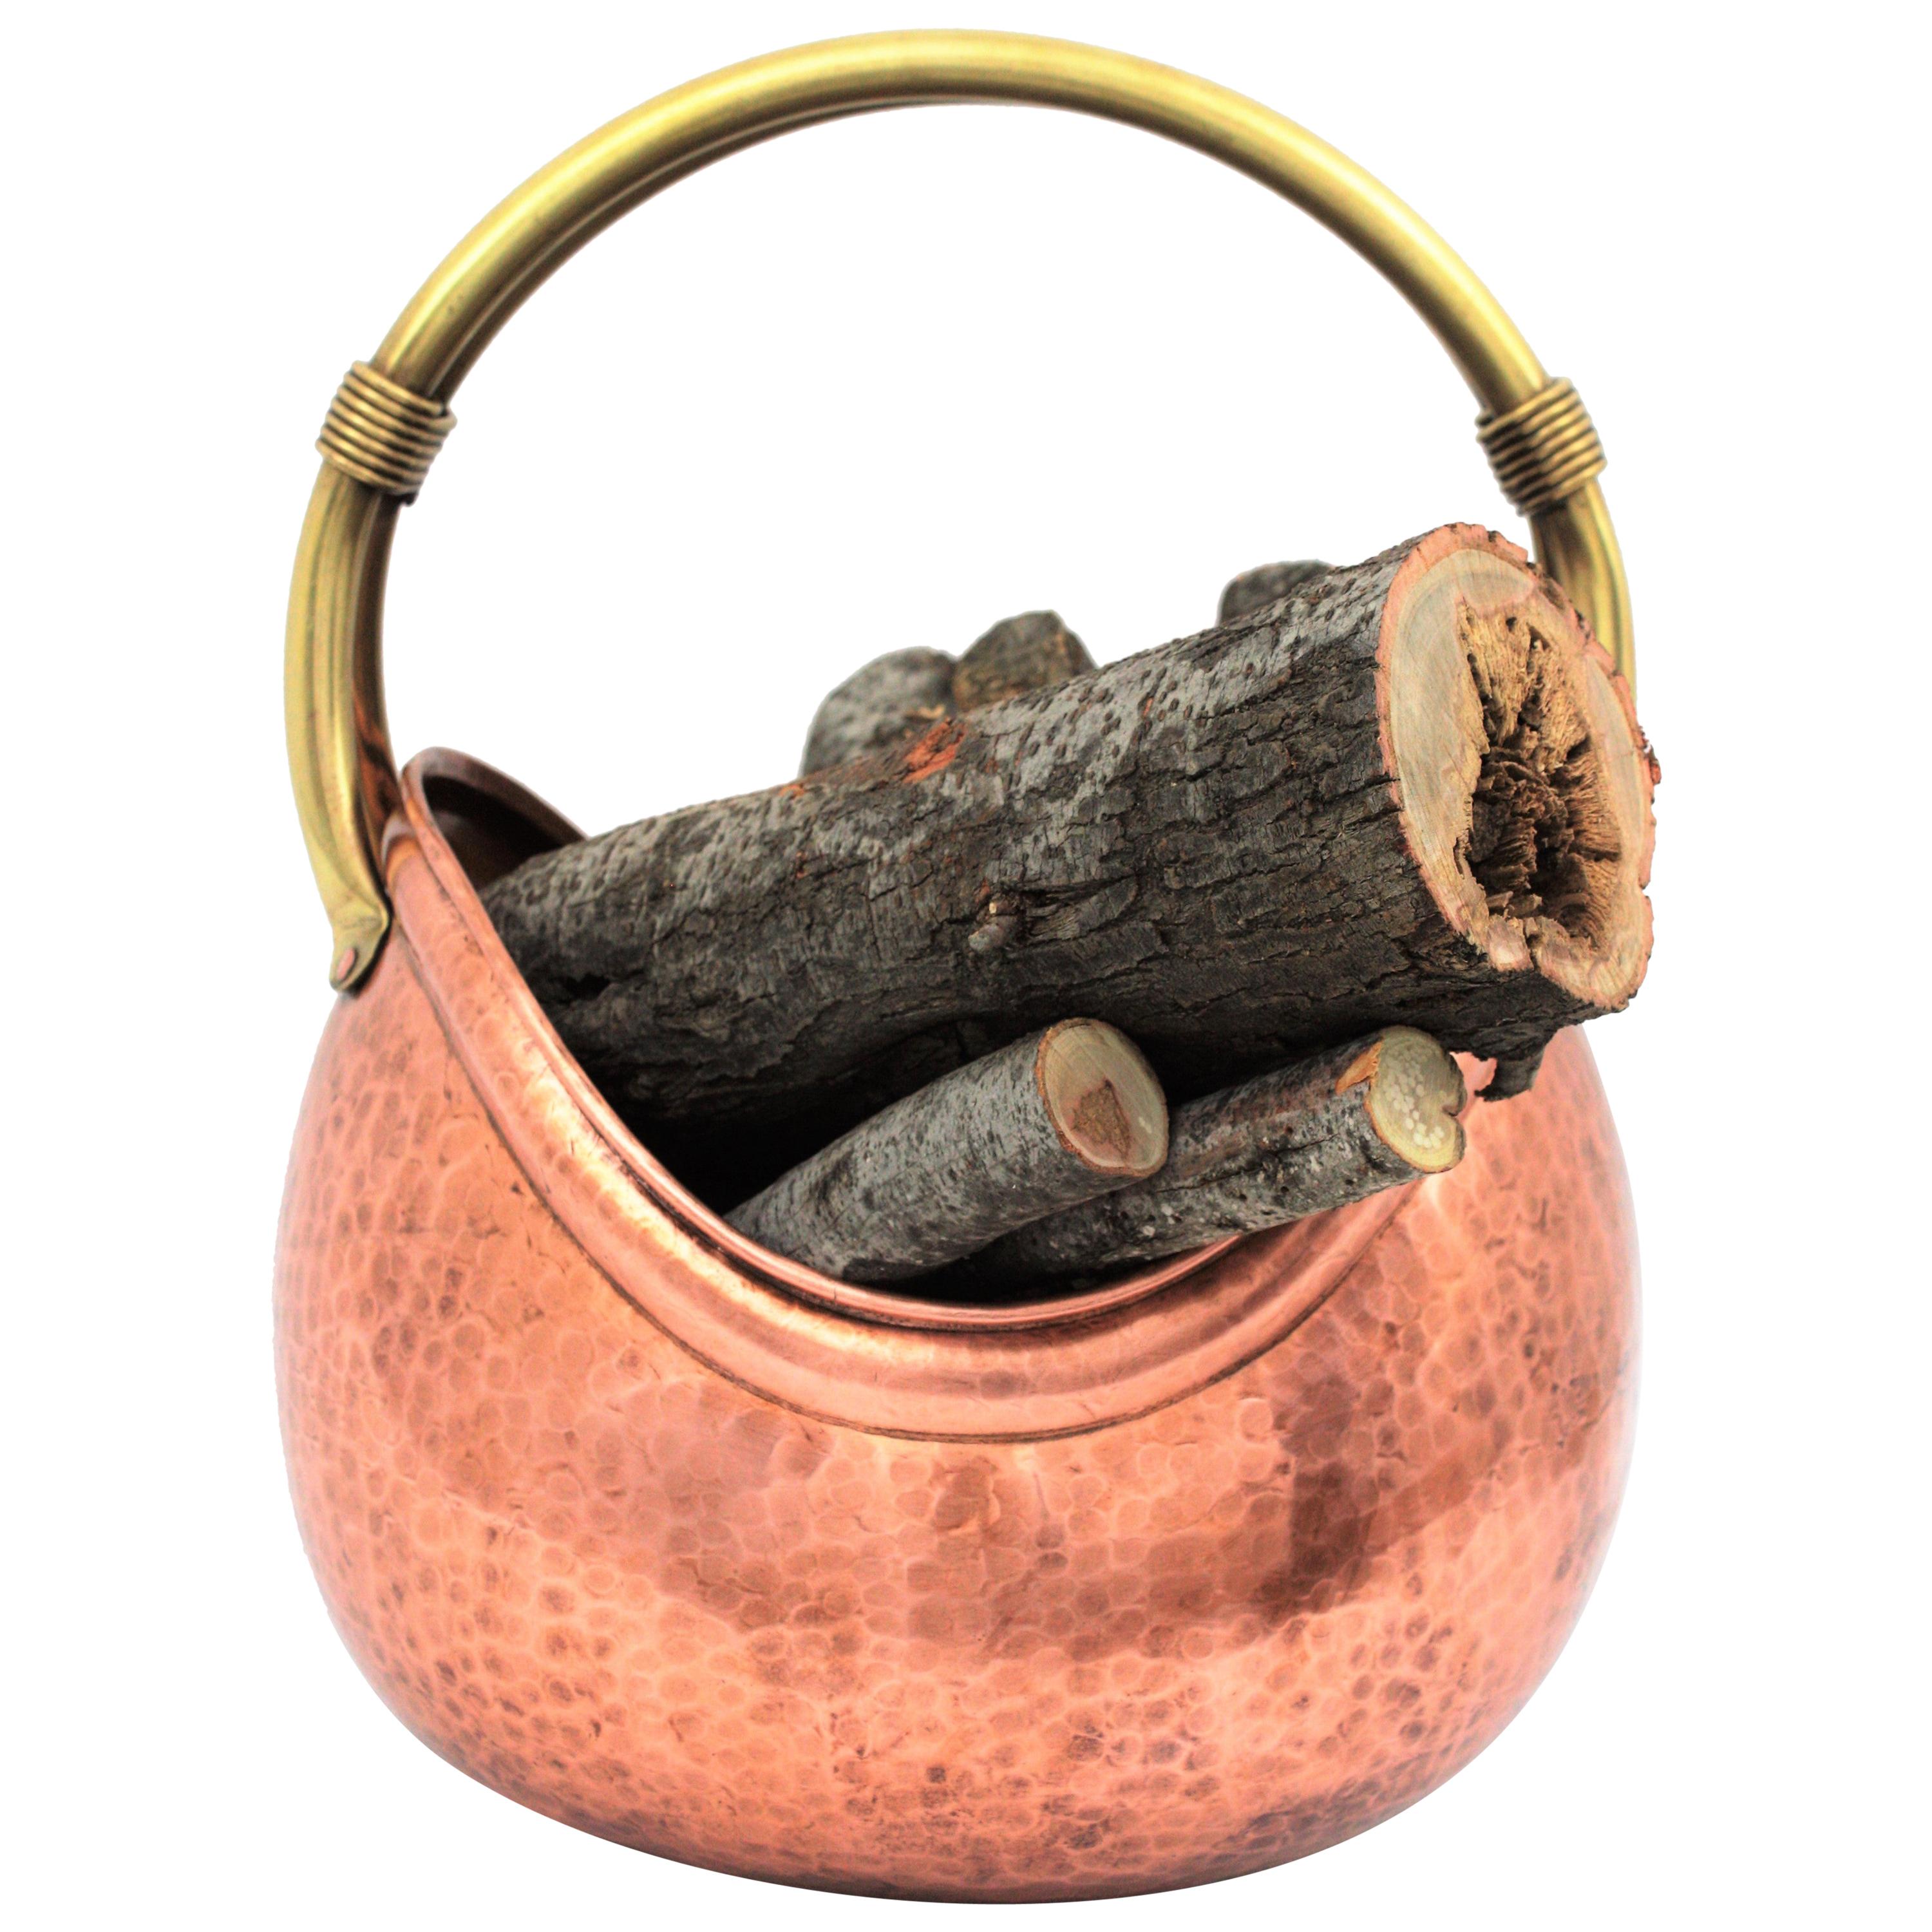 Exquisite copper and brass decorative basket or log holder or jardinière or magazine stand, France, 1950s.
This luxury handcrafted Mid-Century Modern basket is made with hand-hammered polished copper and it has a brass handle to hold it with rope